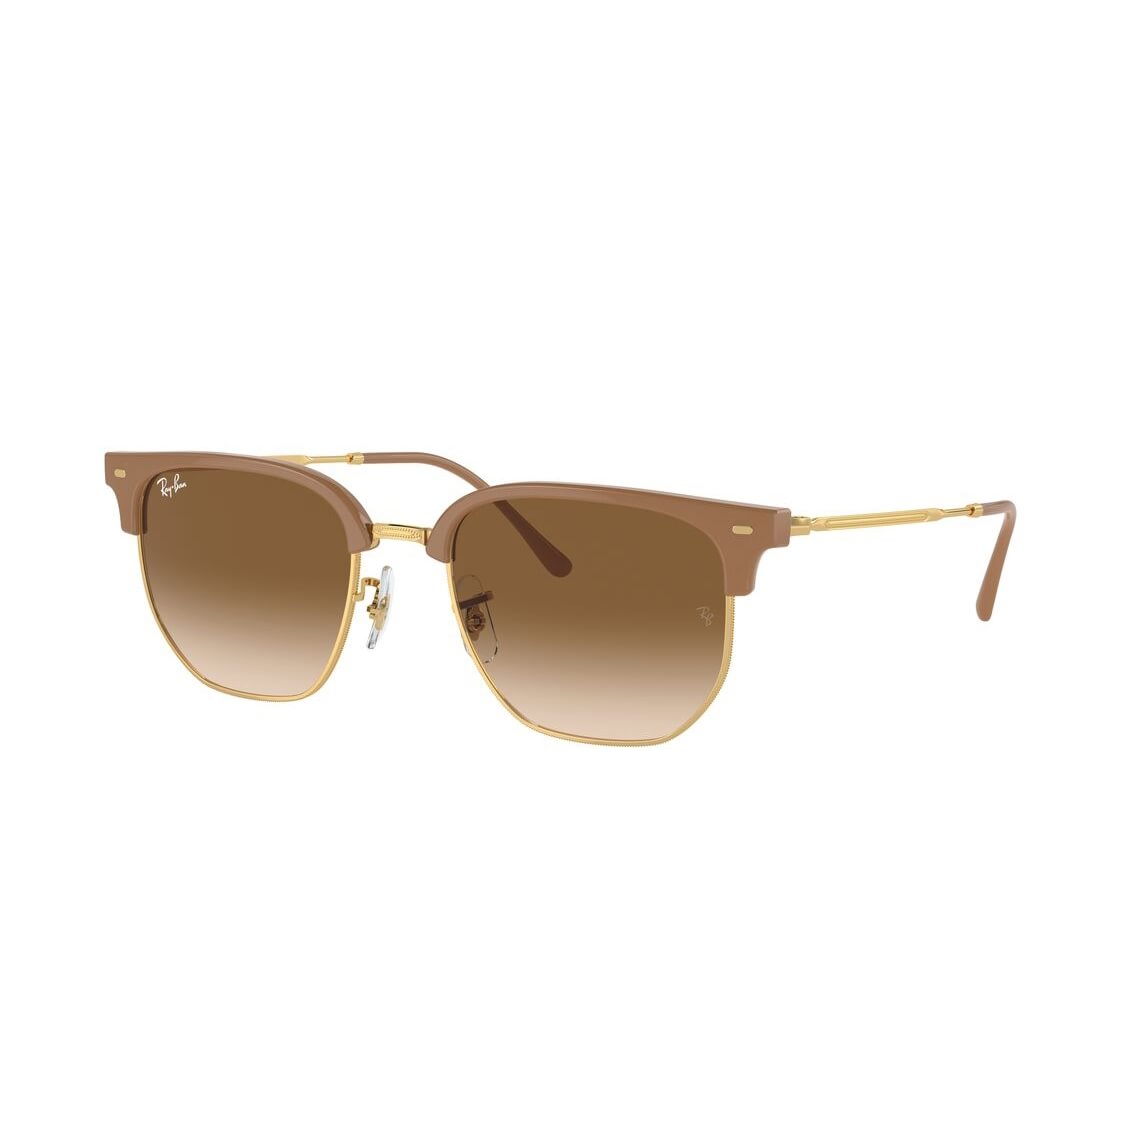 Ray-Ban New Clubmaster RB4416 672151 5120